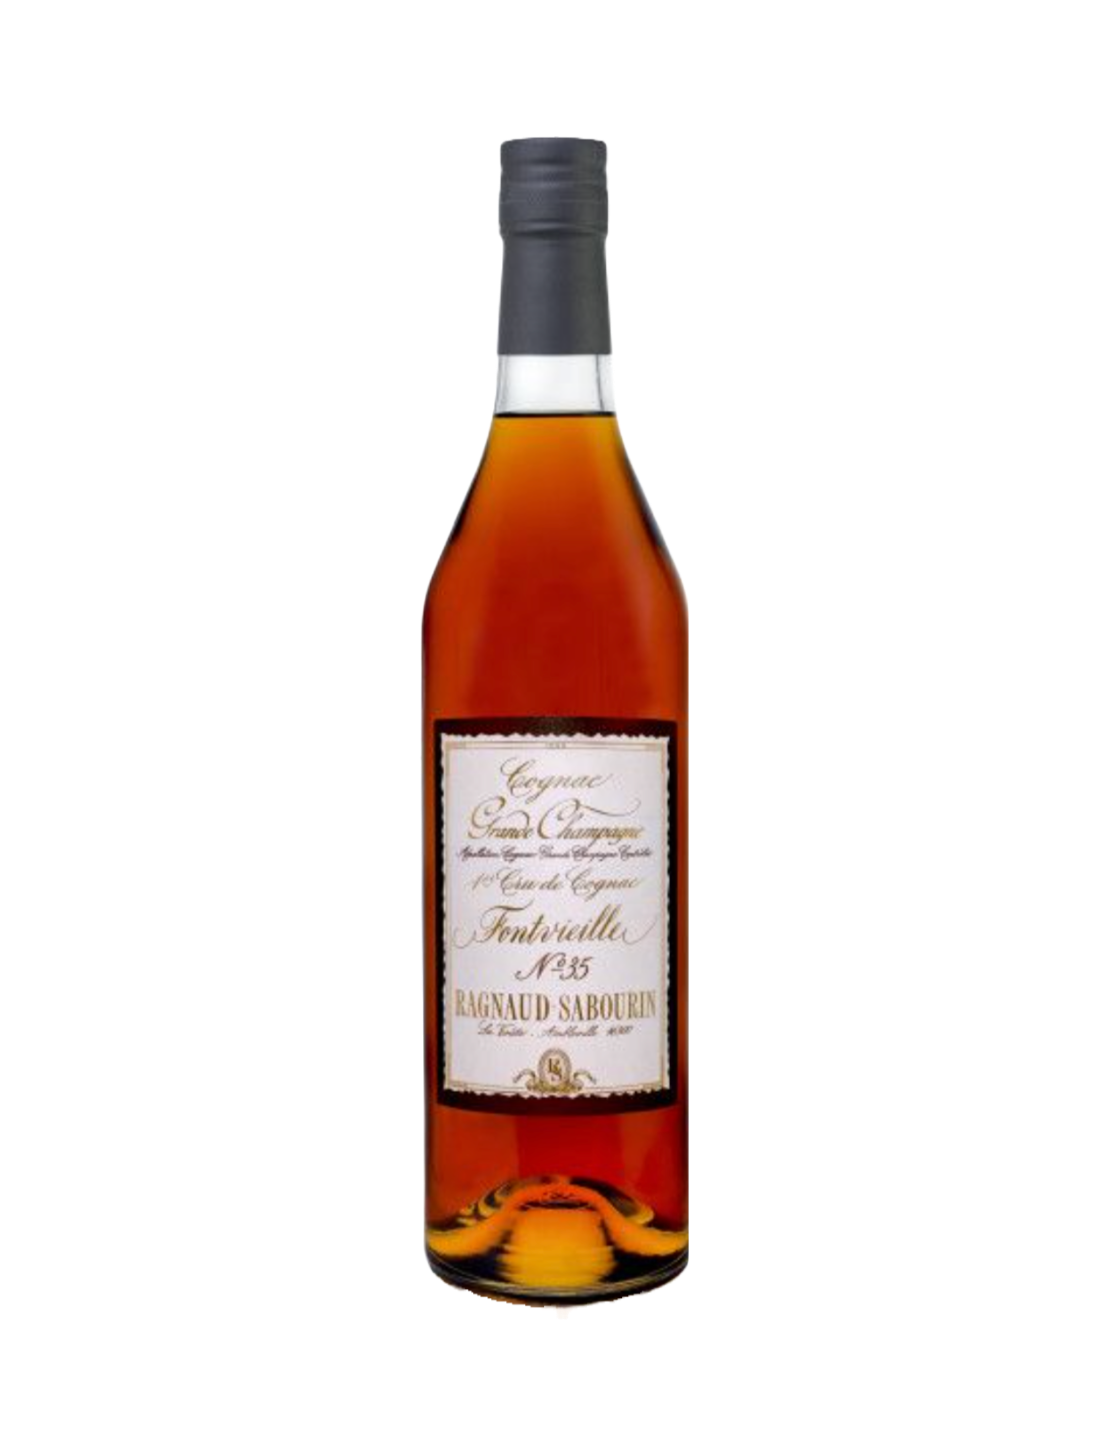 Elegant bottle of Cognac: Ragnaud-Sabourin No. 35 Fontvieille in front of a plain white background